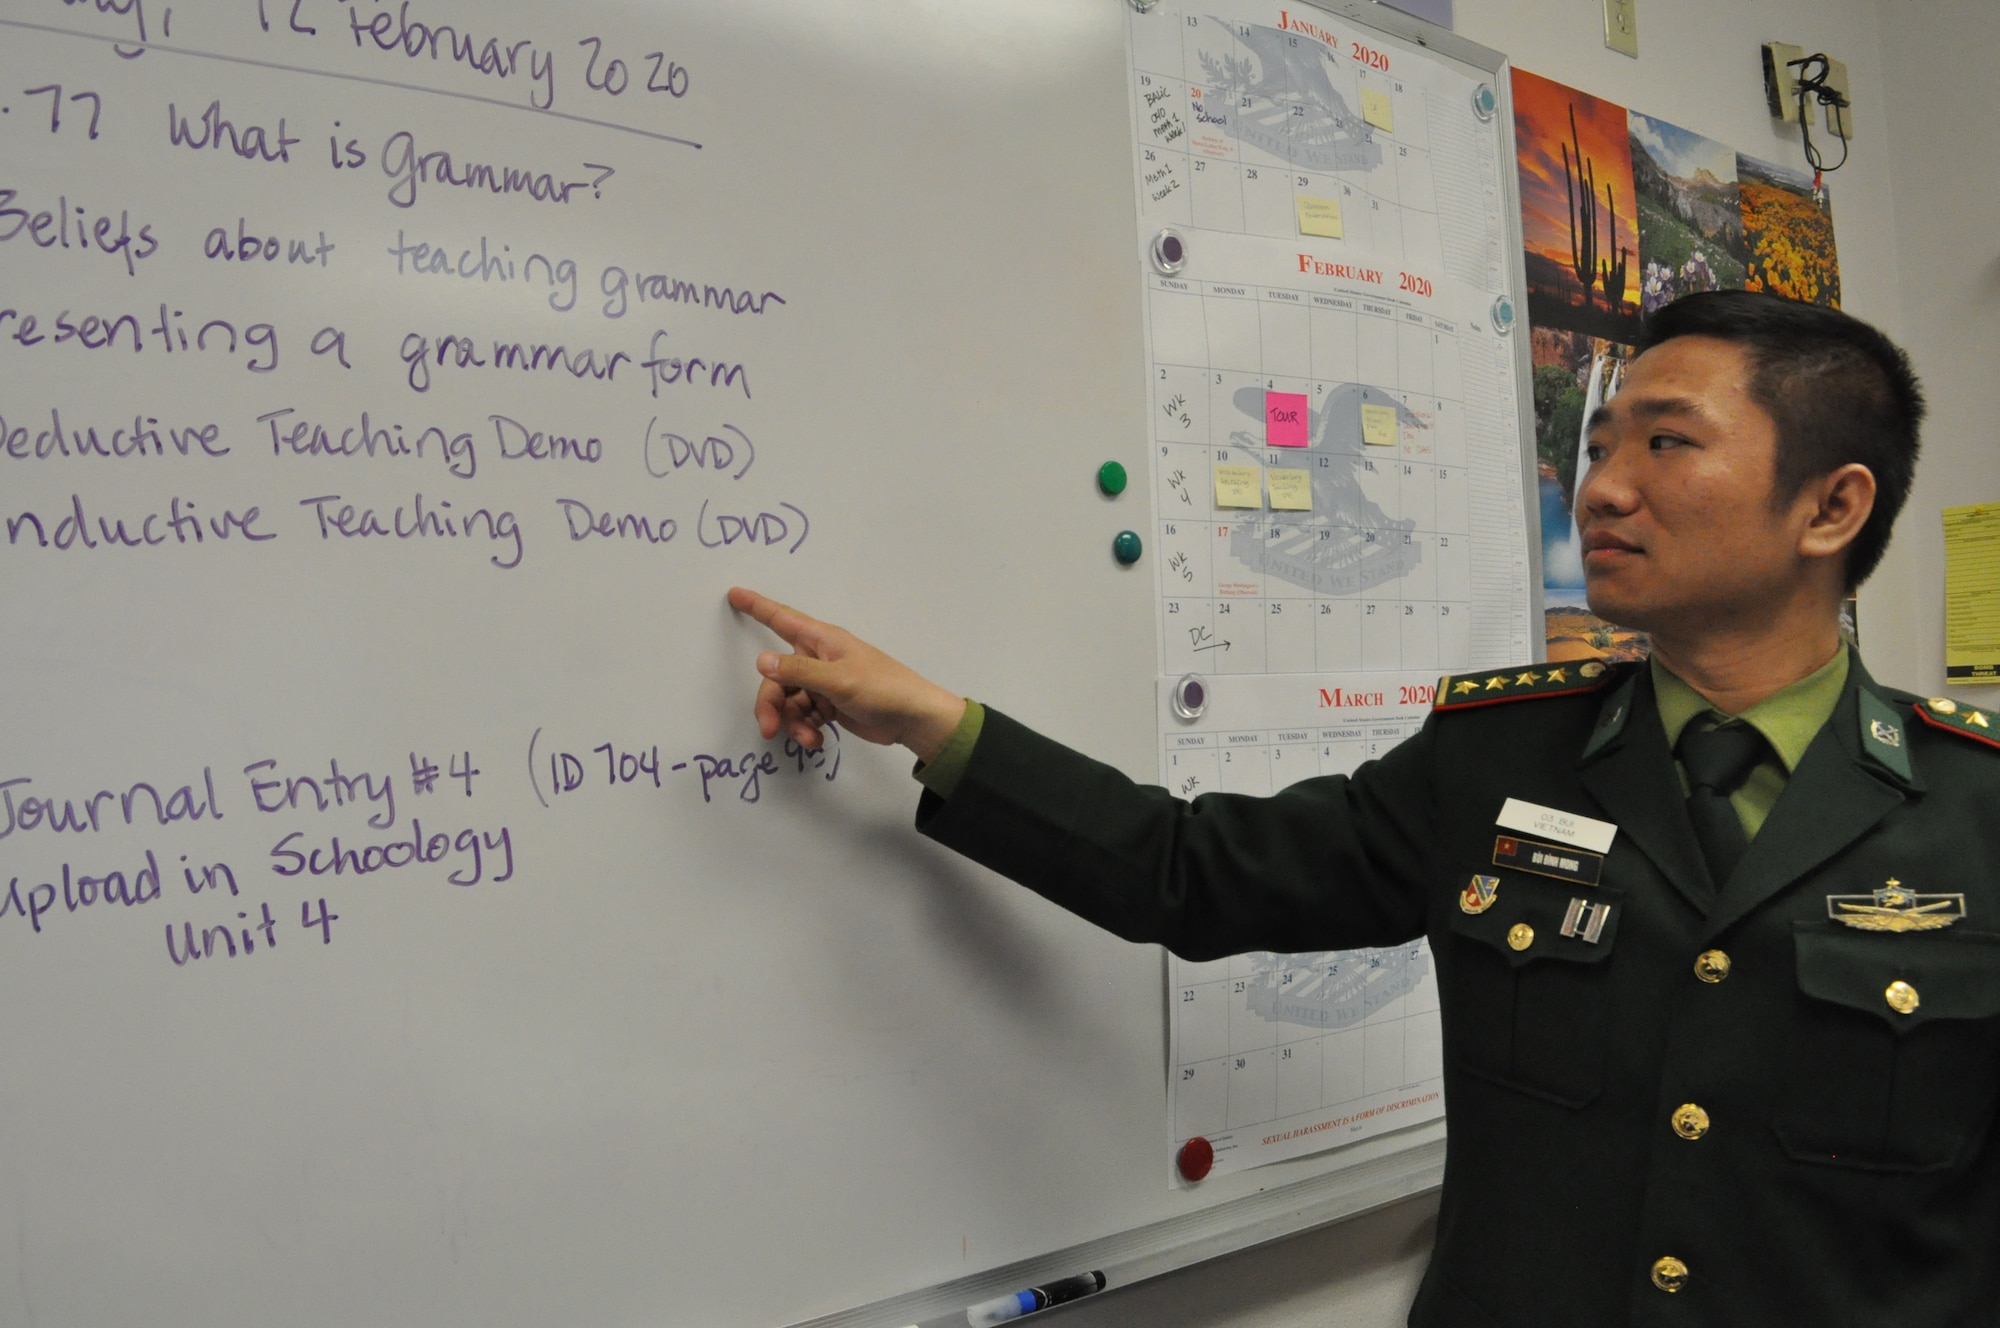 DLIELC upholds the US partnership with Vietnam in many ways. On-campus, DLIELC hosts students from all of Vietnam's branches of military. Pictured is CPT Dinh Mong Bui of the Vietnmanese Army in his General English (GE) classroom. Once graduated from GE, CPT Bui will continue his English Language Training in the Basic American Language Instructor Course (BALIC).